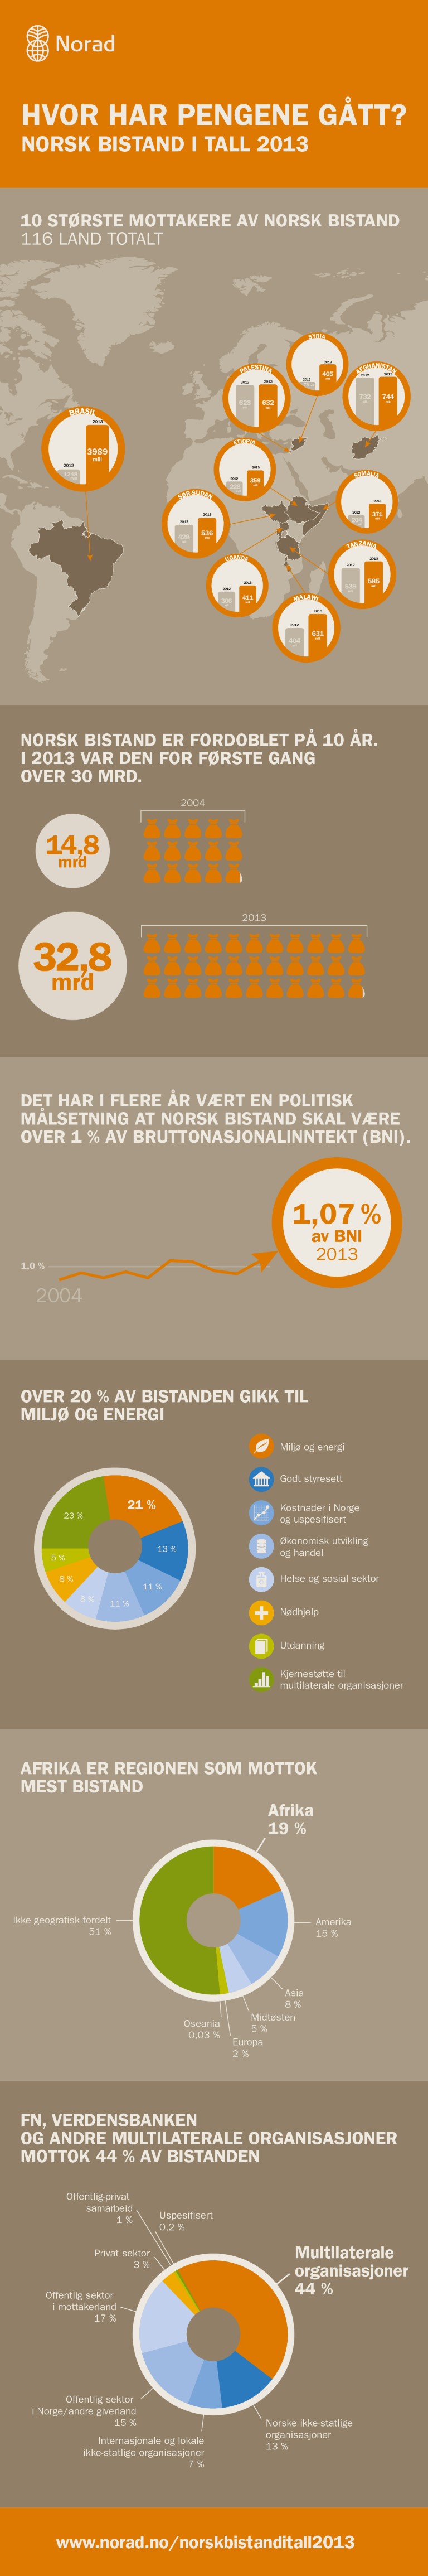 Norsk bistand i tall 2013